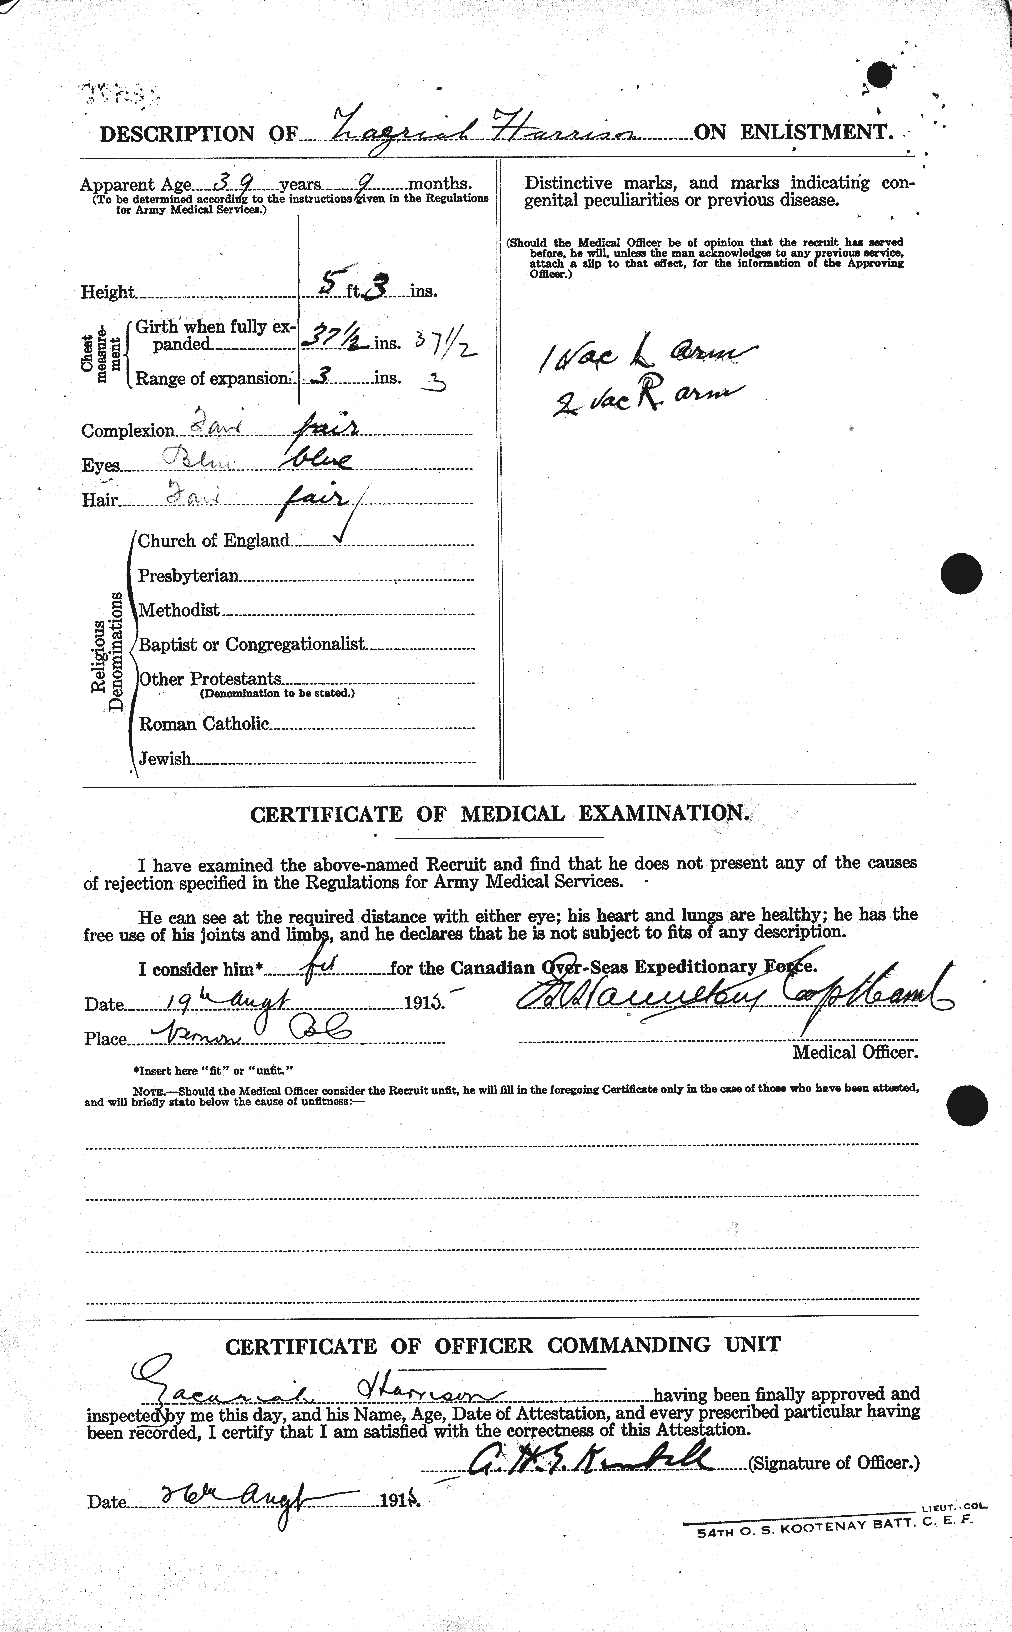 Personnel Records of the First World War - CEF 380008b